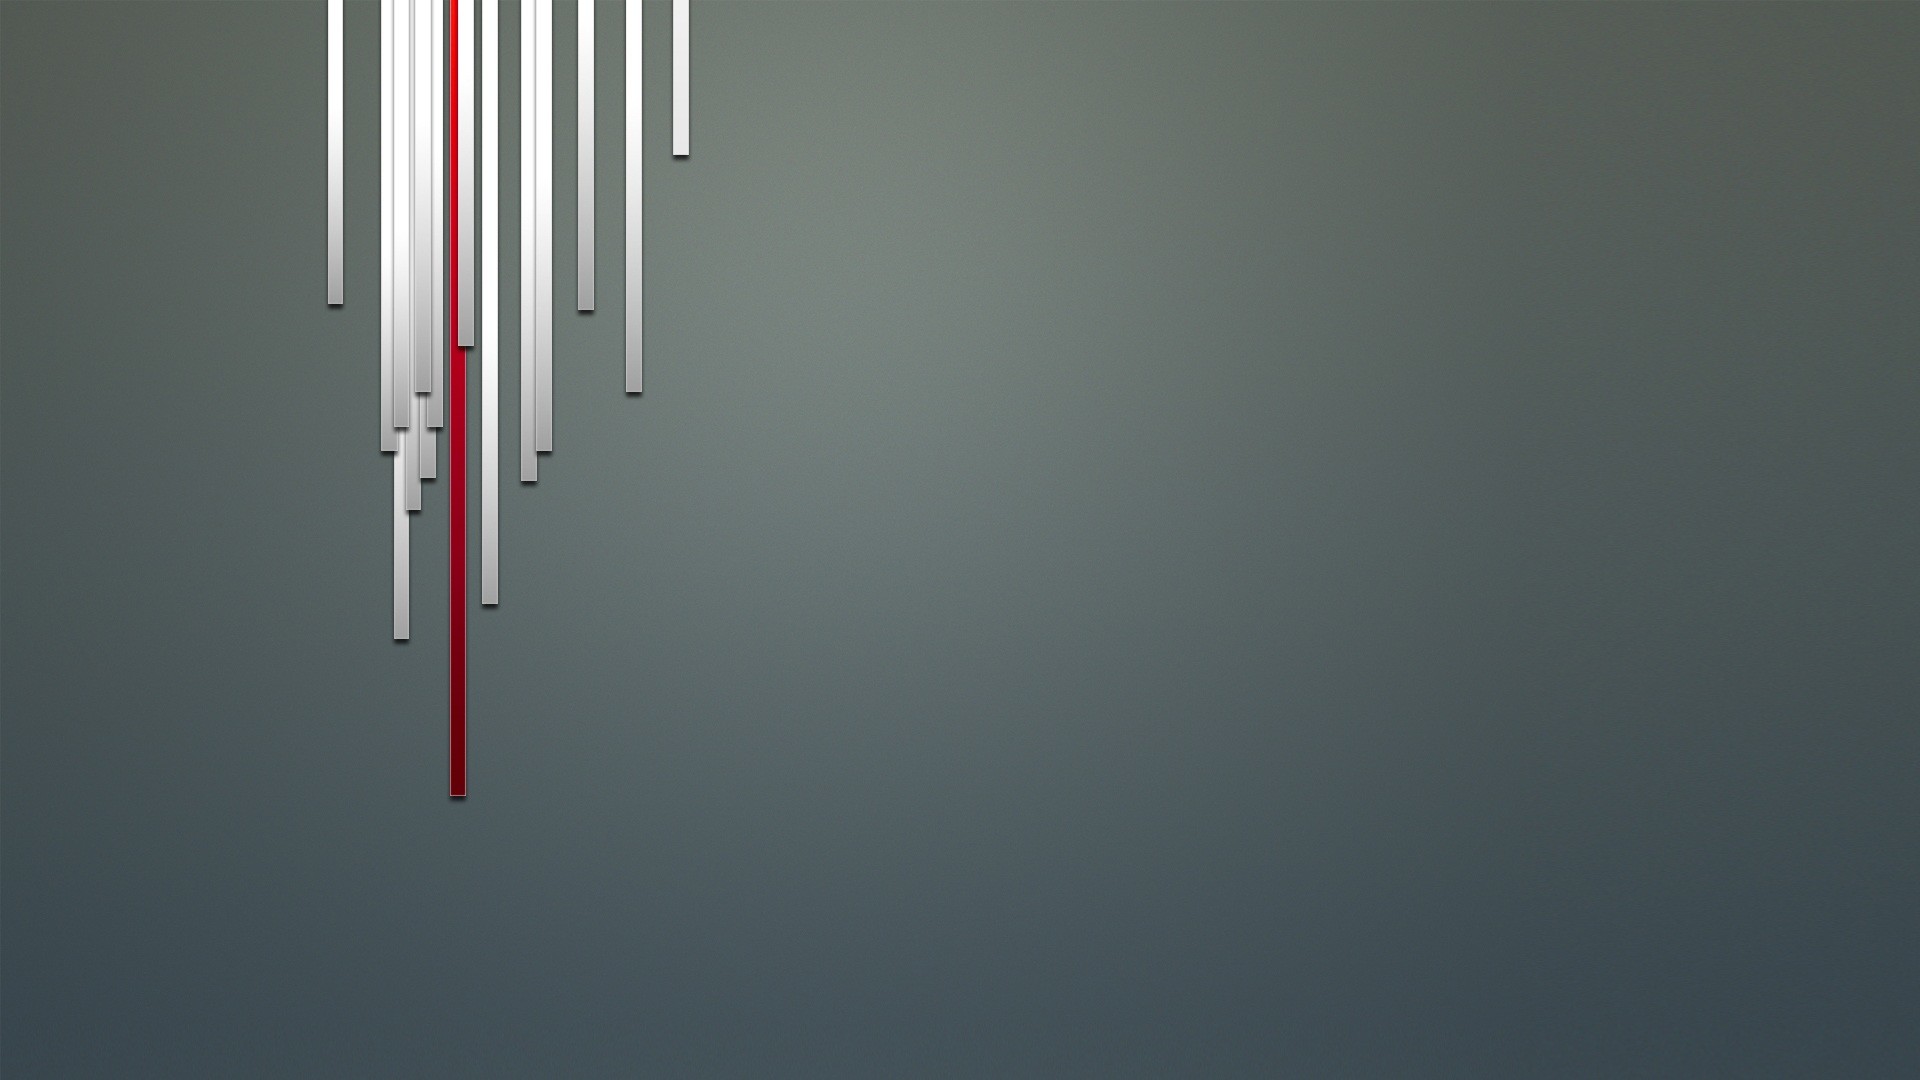 1920x1080 Simplistic design wallpaper by ThusWeEnd Simplistic design wallpaper by  ThusWeEnd